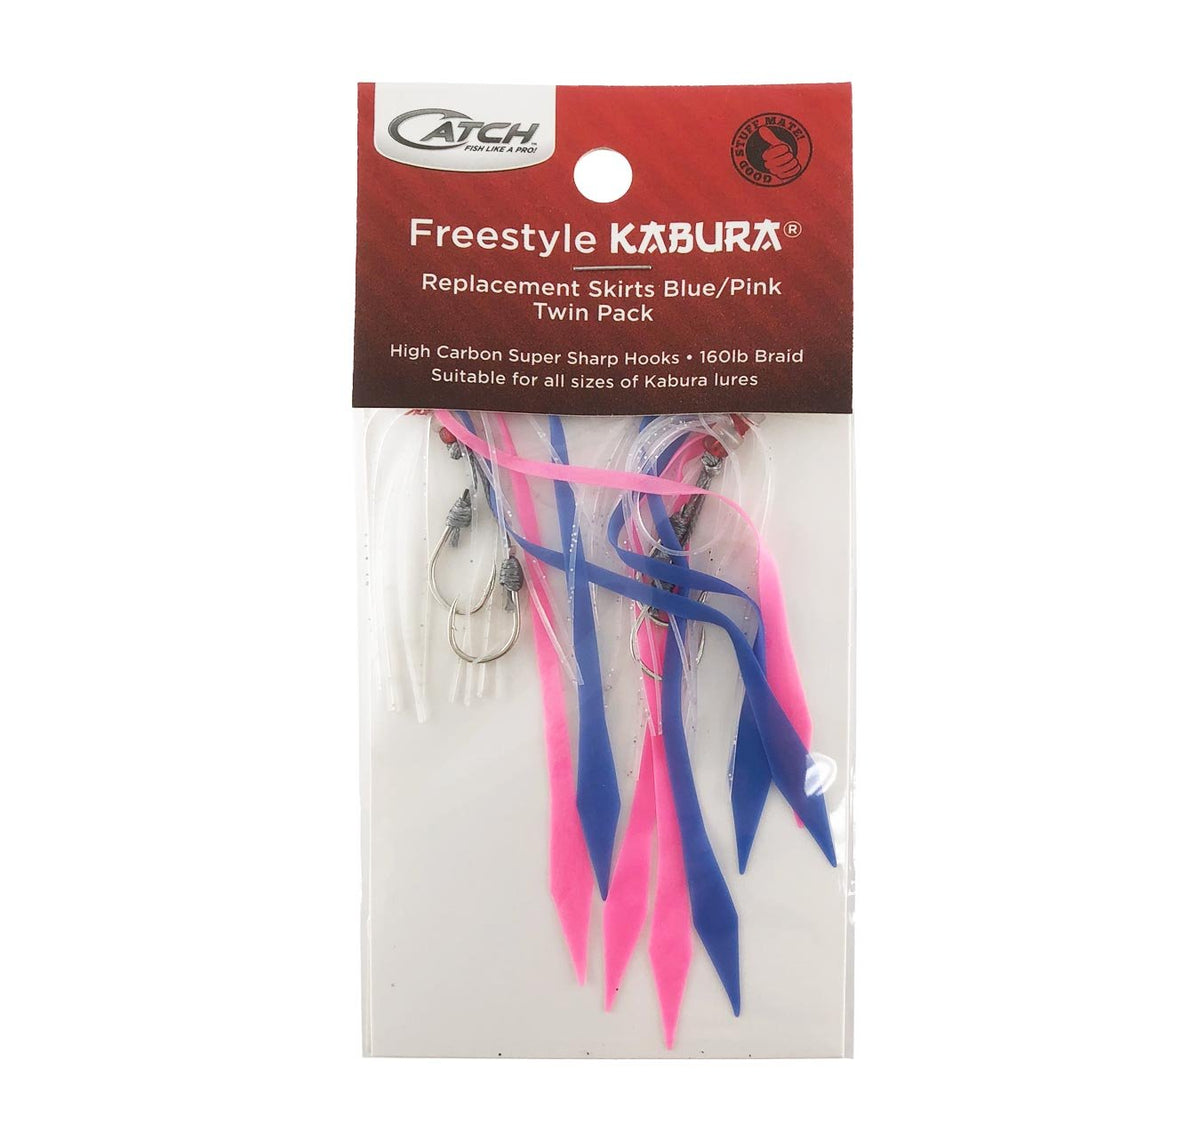 Catch Freestyle Kabura Replacement Skirts 2 Pack